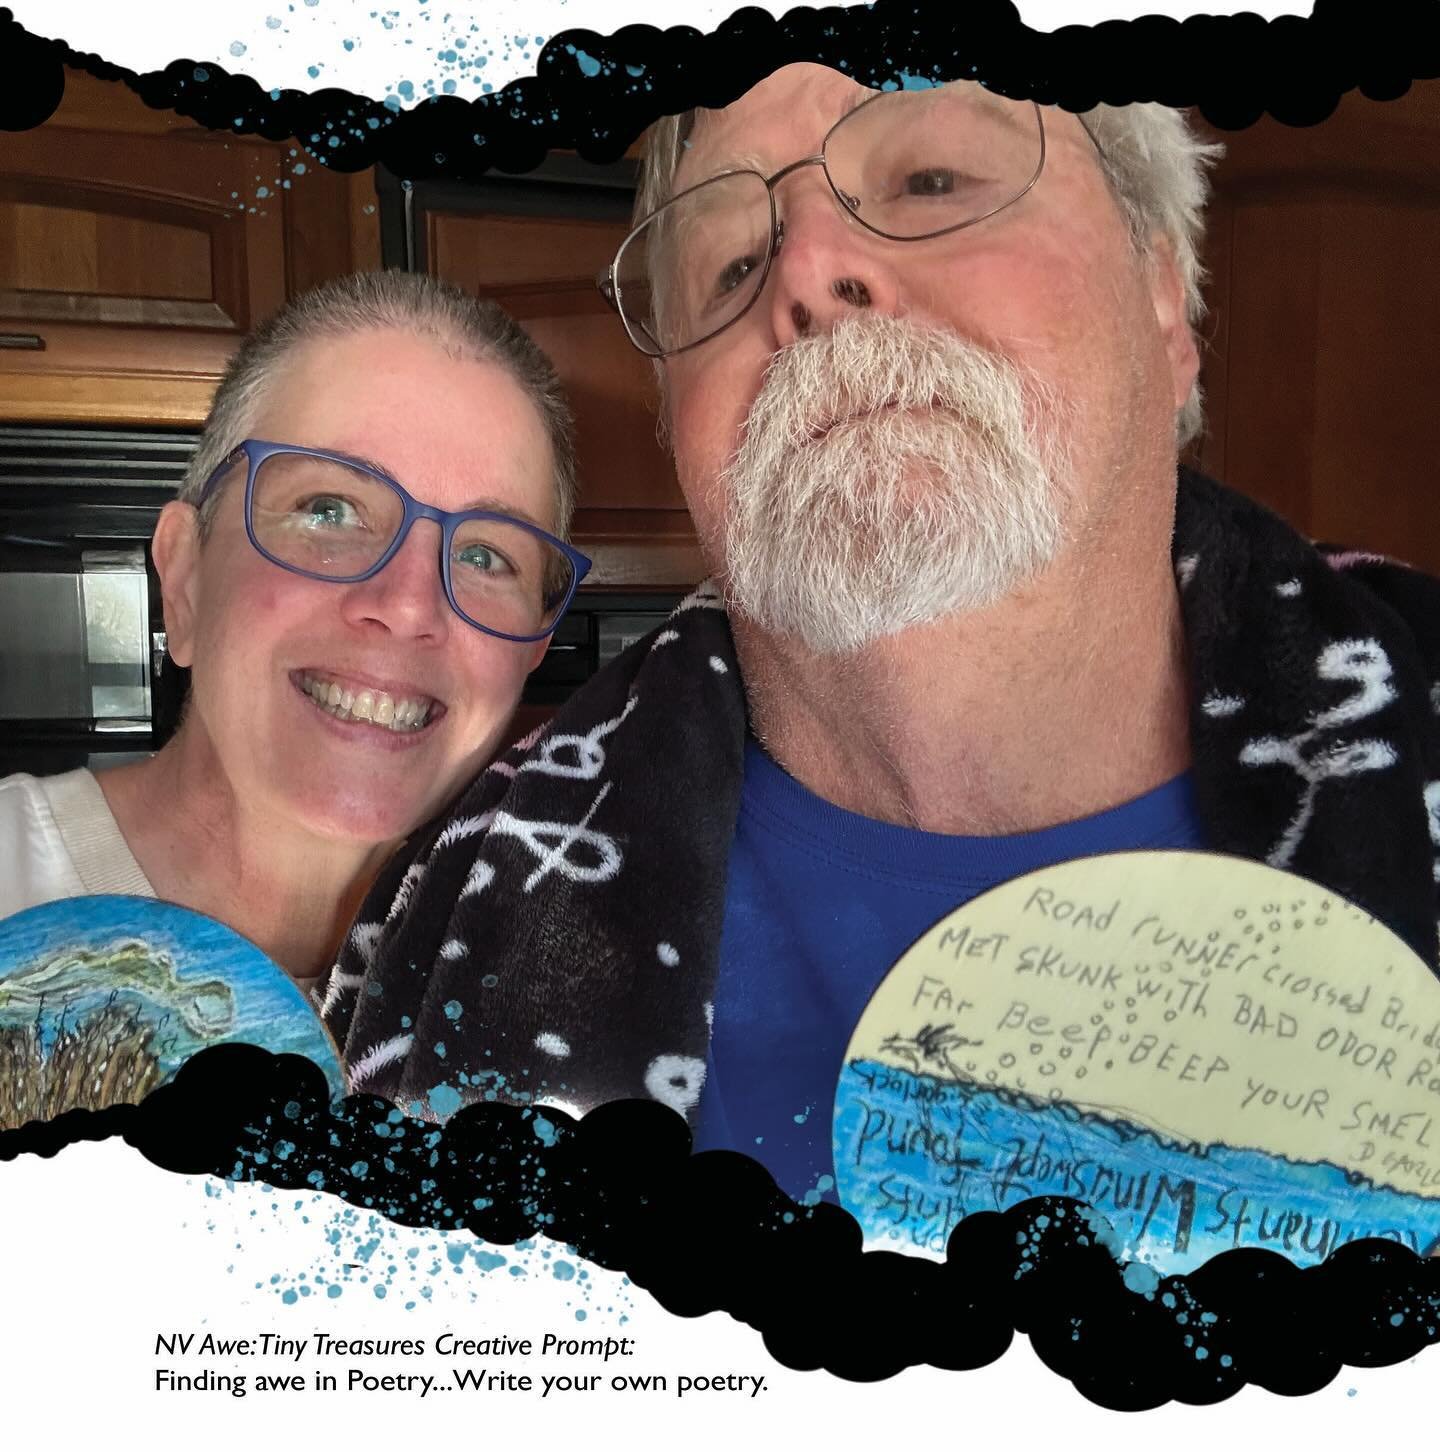 Papa and I spent a day @ccwetlandspark for its Art day in March. We had so much fun and created these two NV Awe discs. #nvawe #nvawetinytreasures